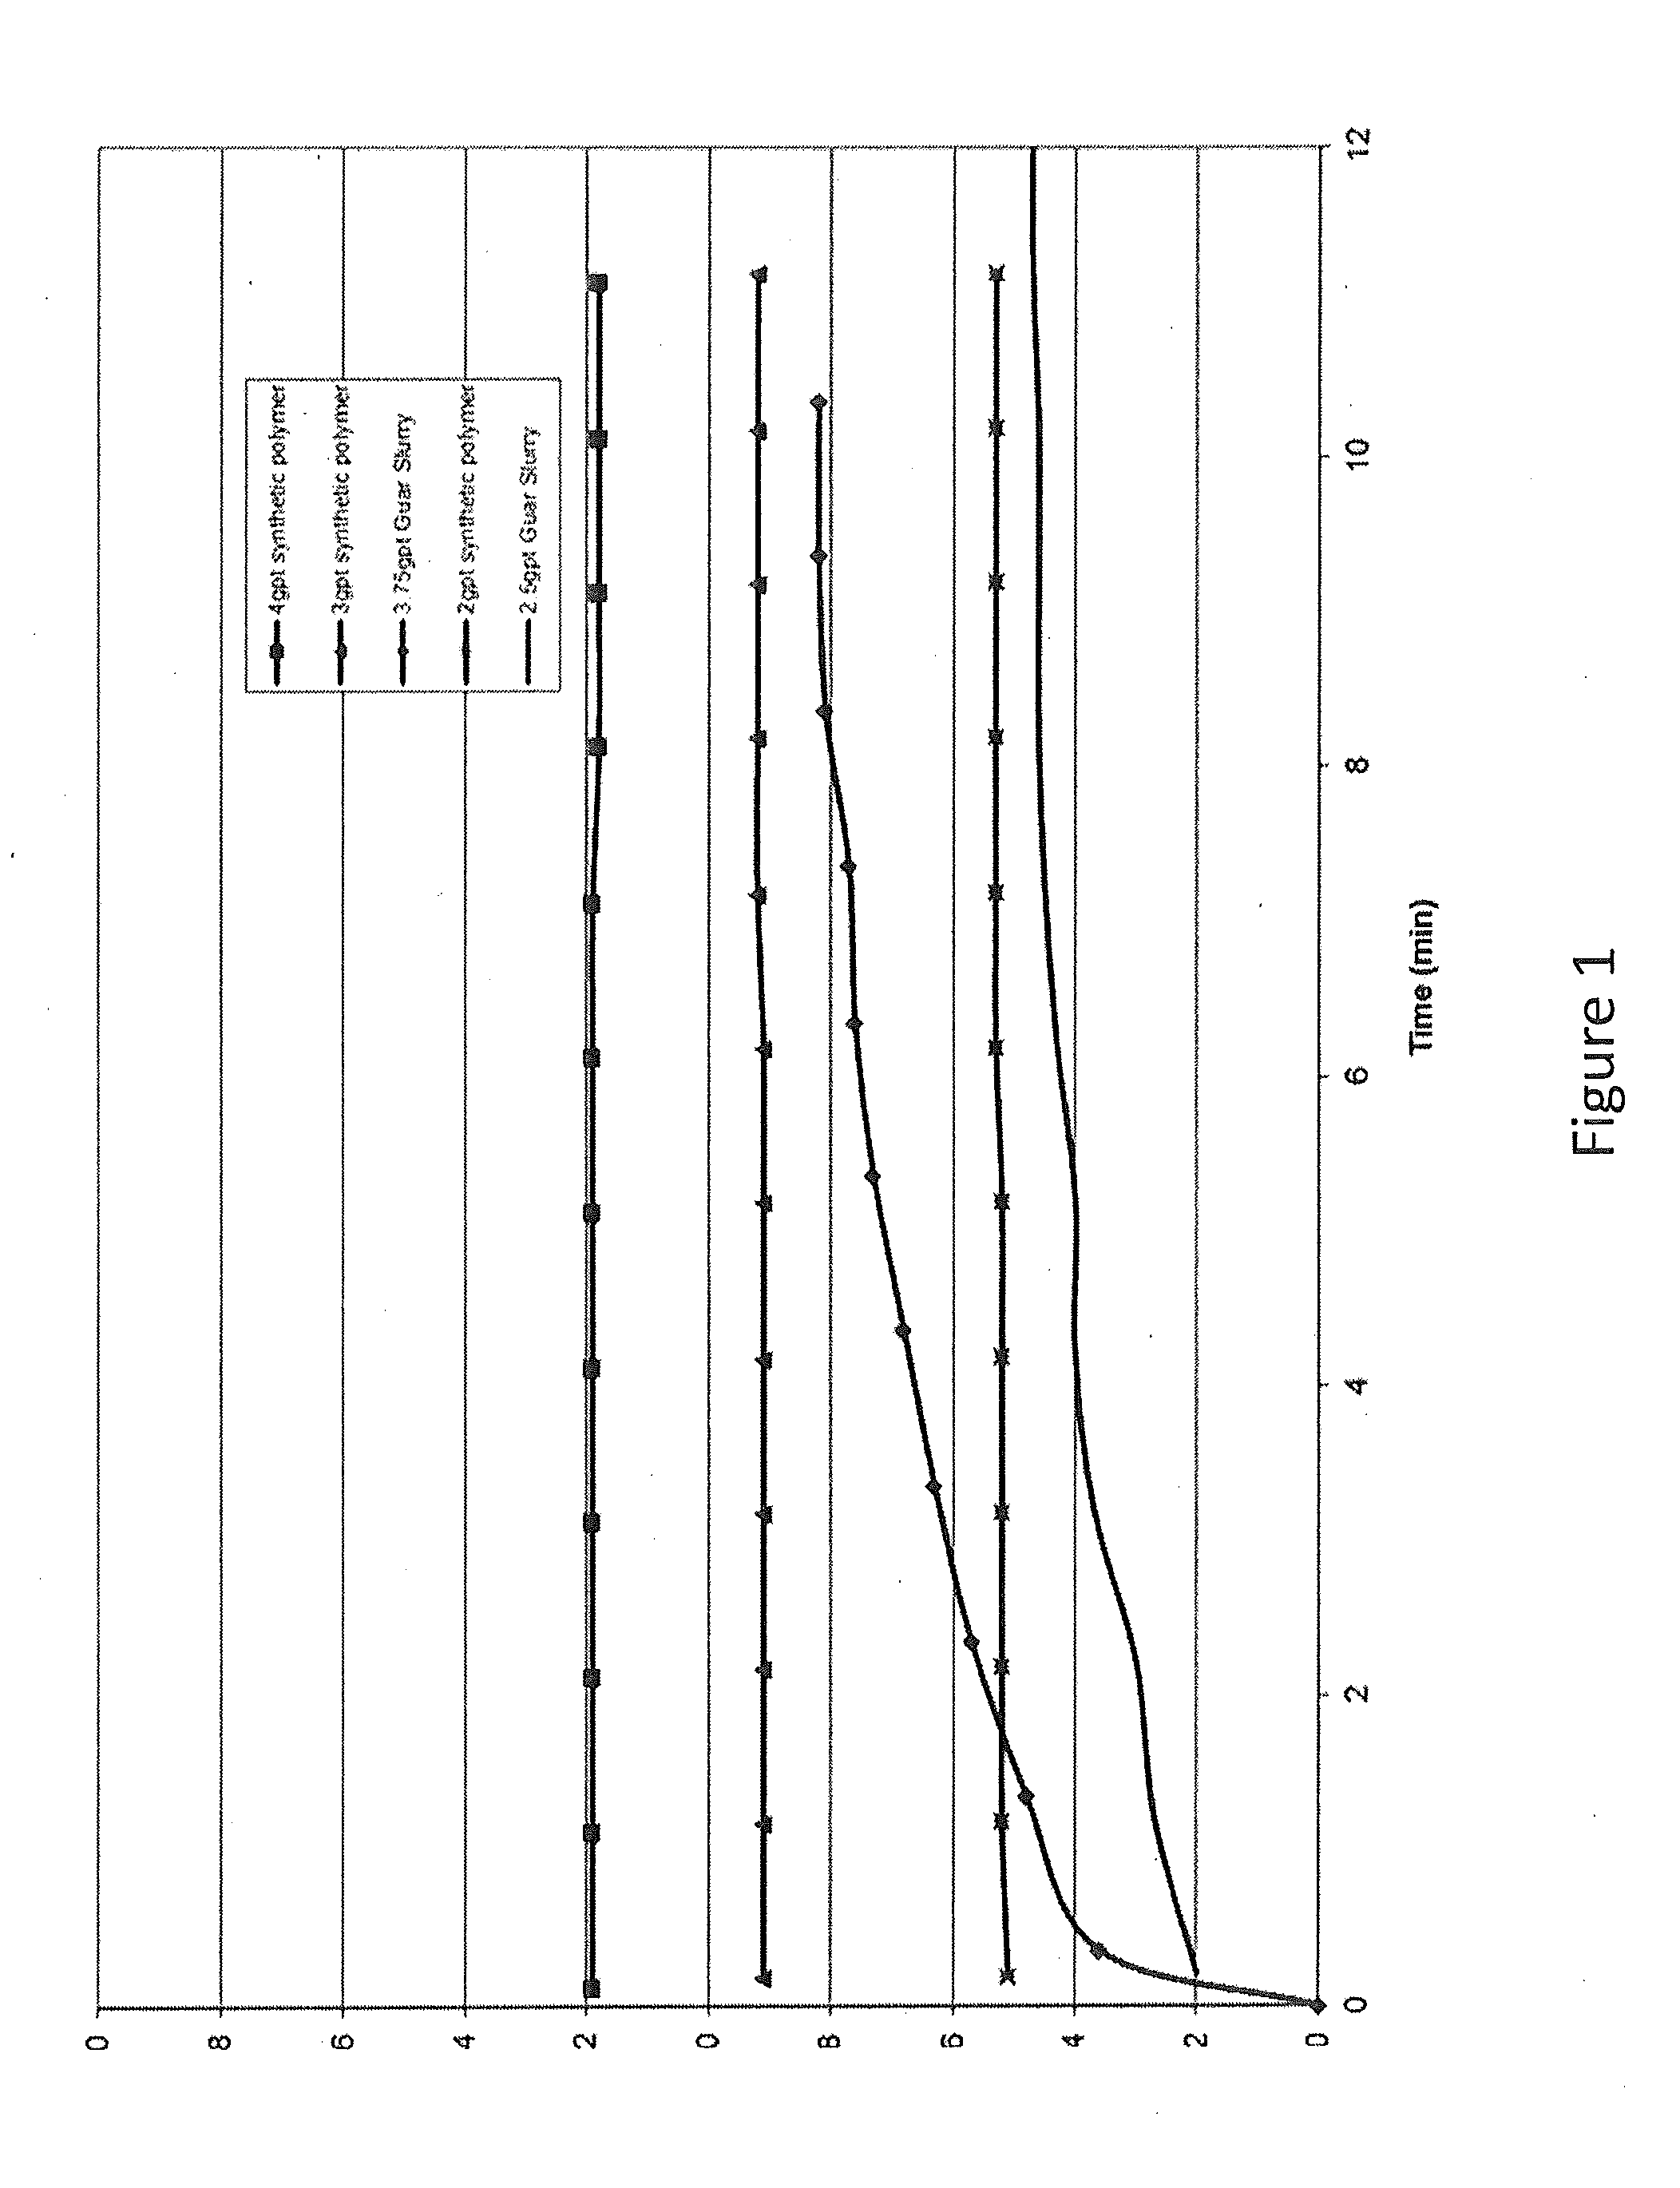 Fracturing Fluids and Methods For Treating Hydrocarbon-Bearing Formations